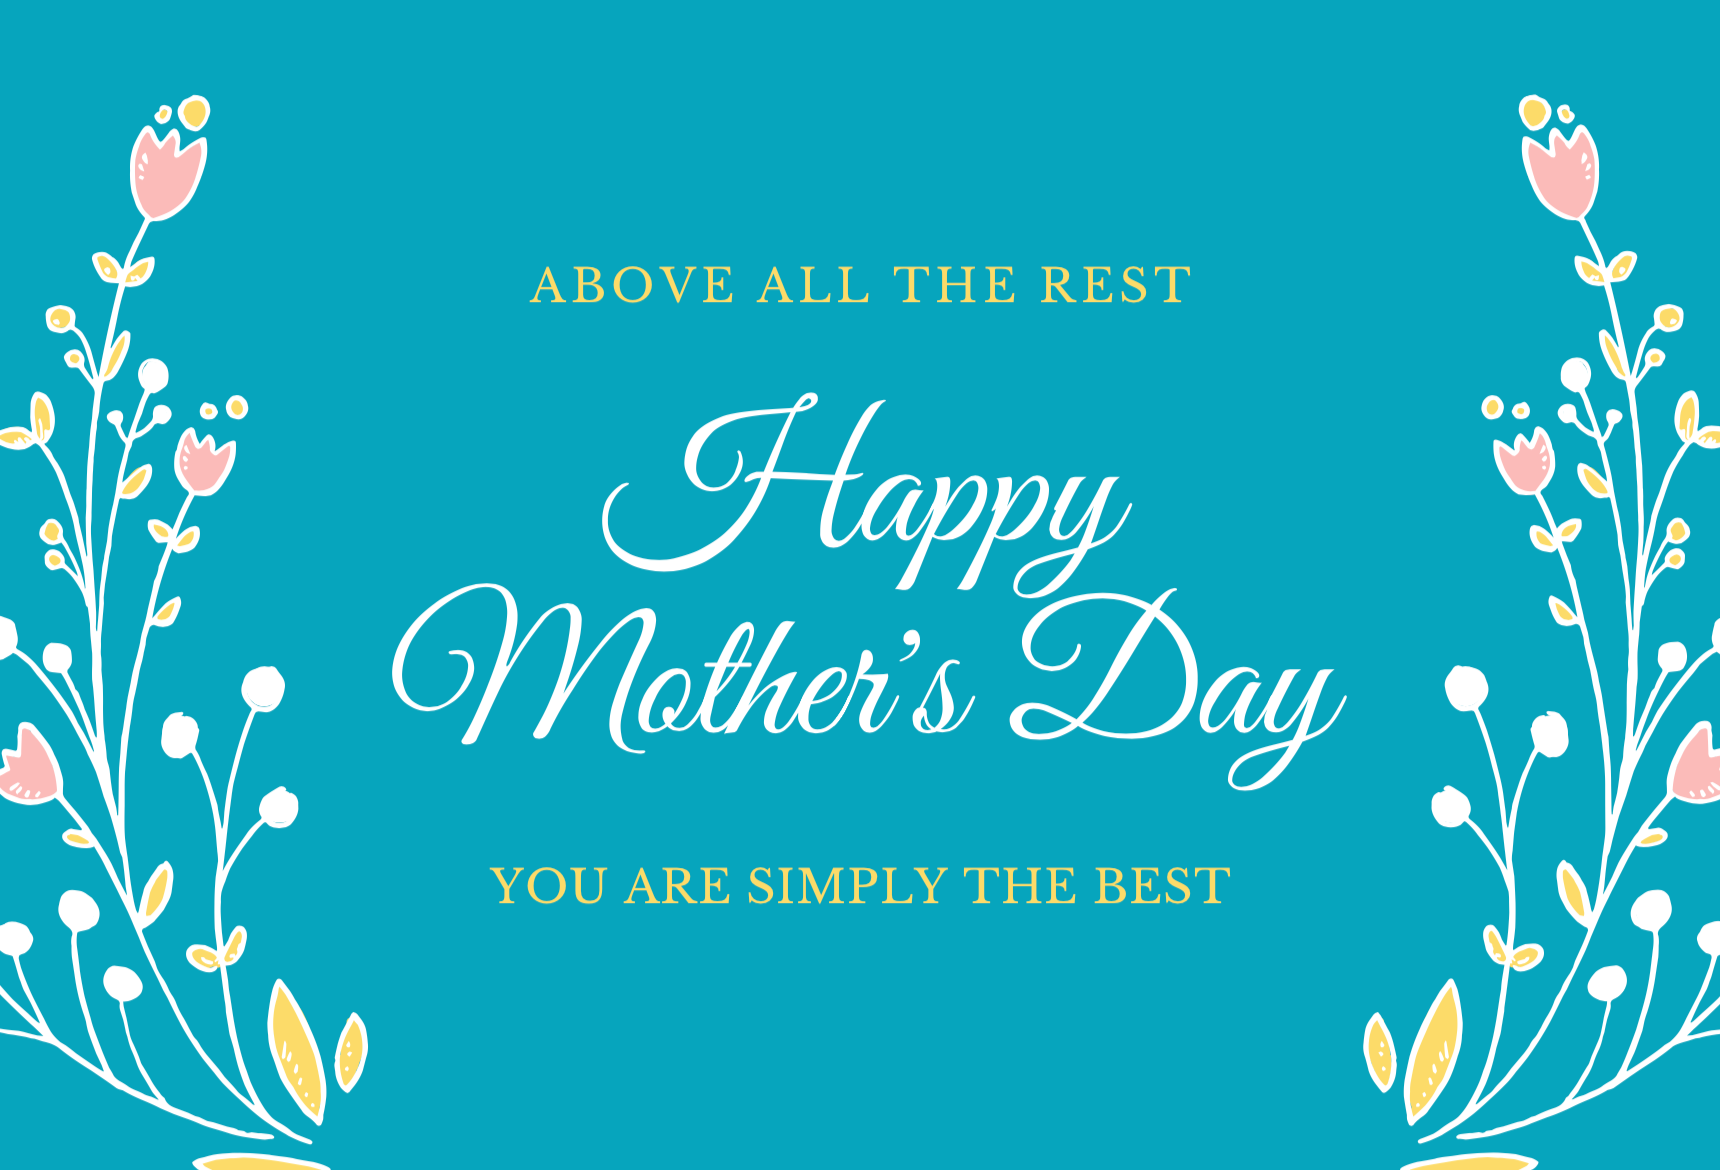 3 Mother’s Day Marketing Plans to Help You Execute Your Own | MassageBook